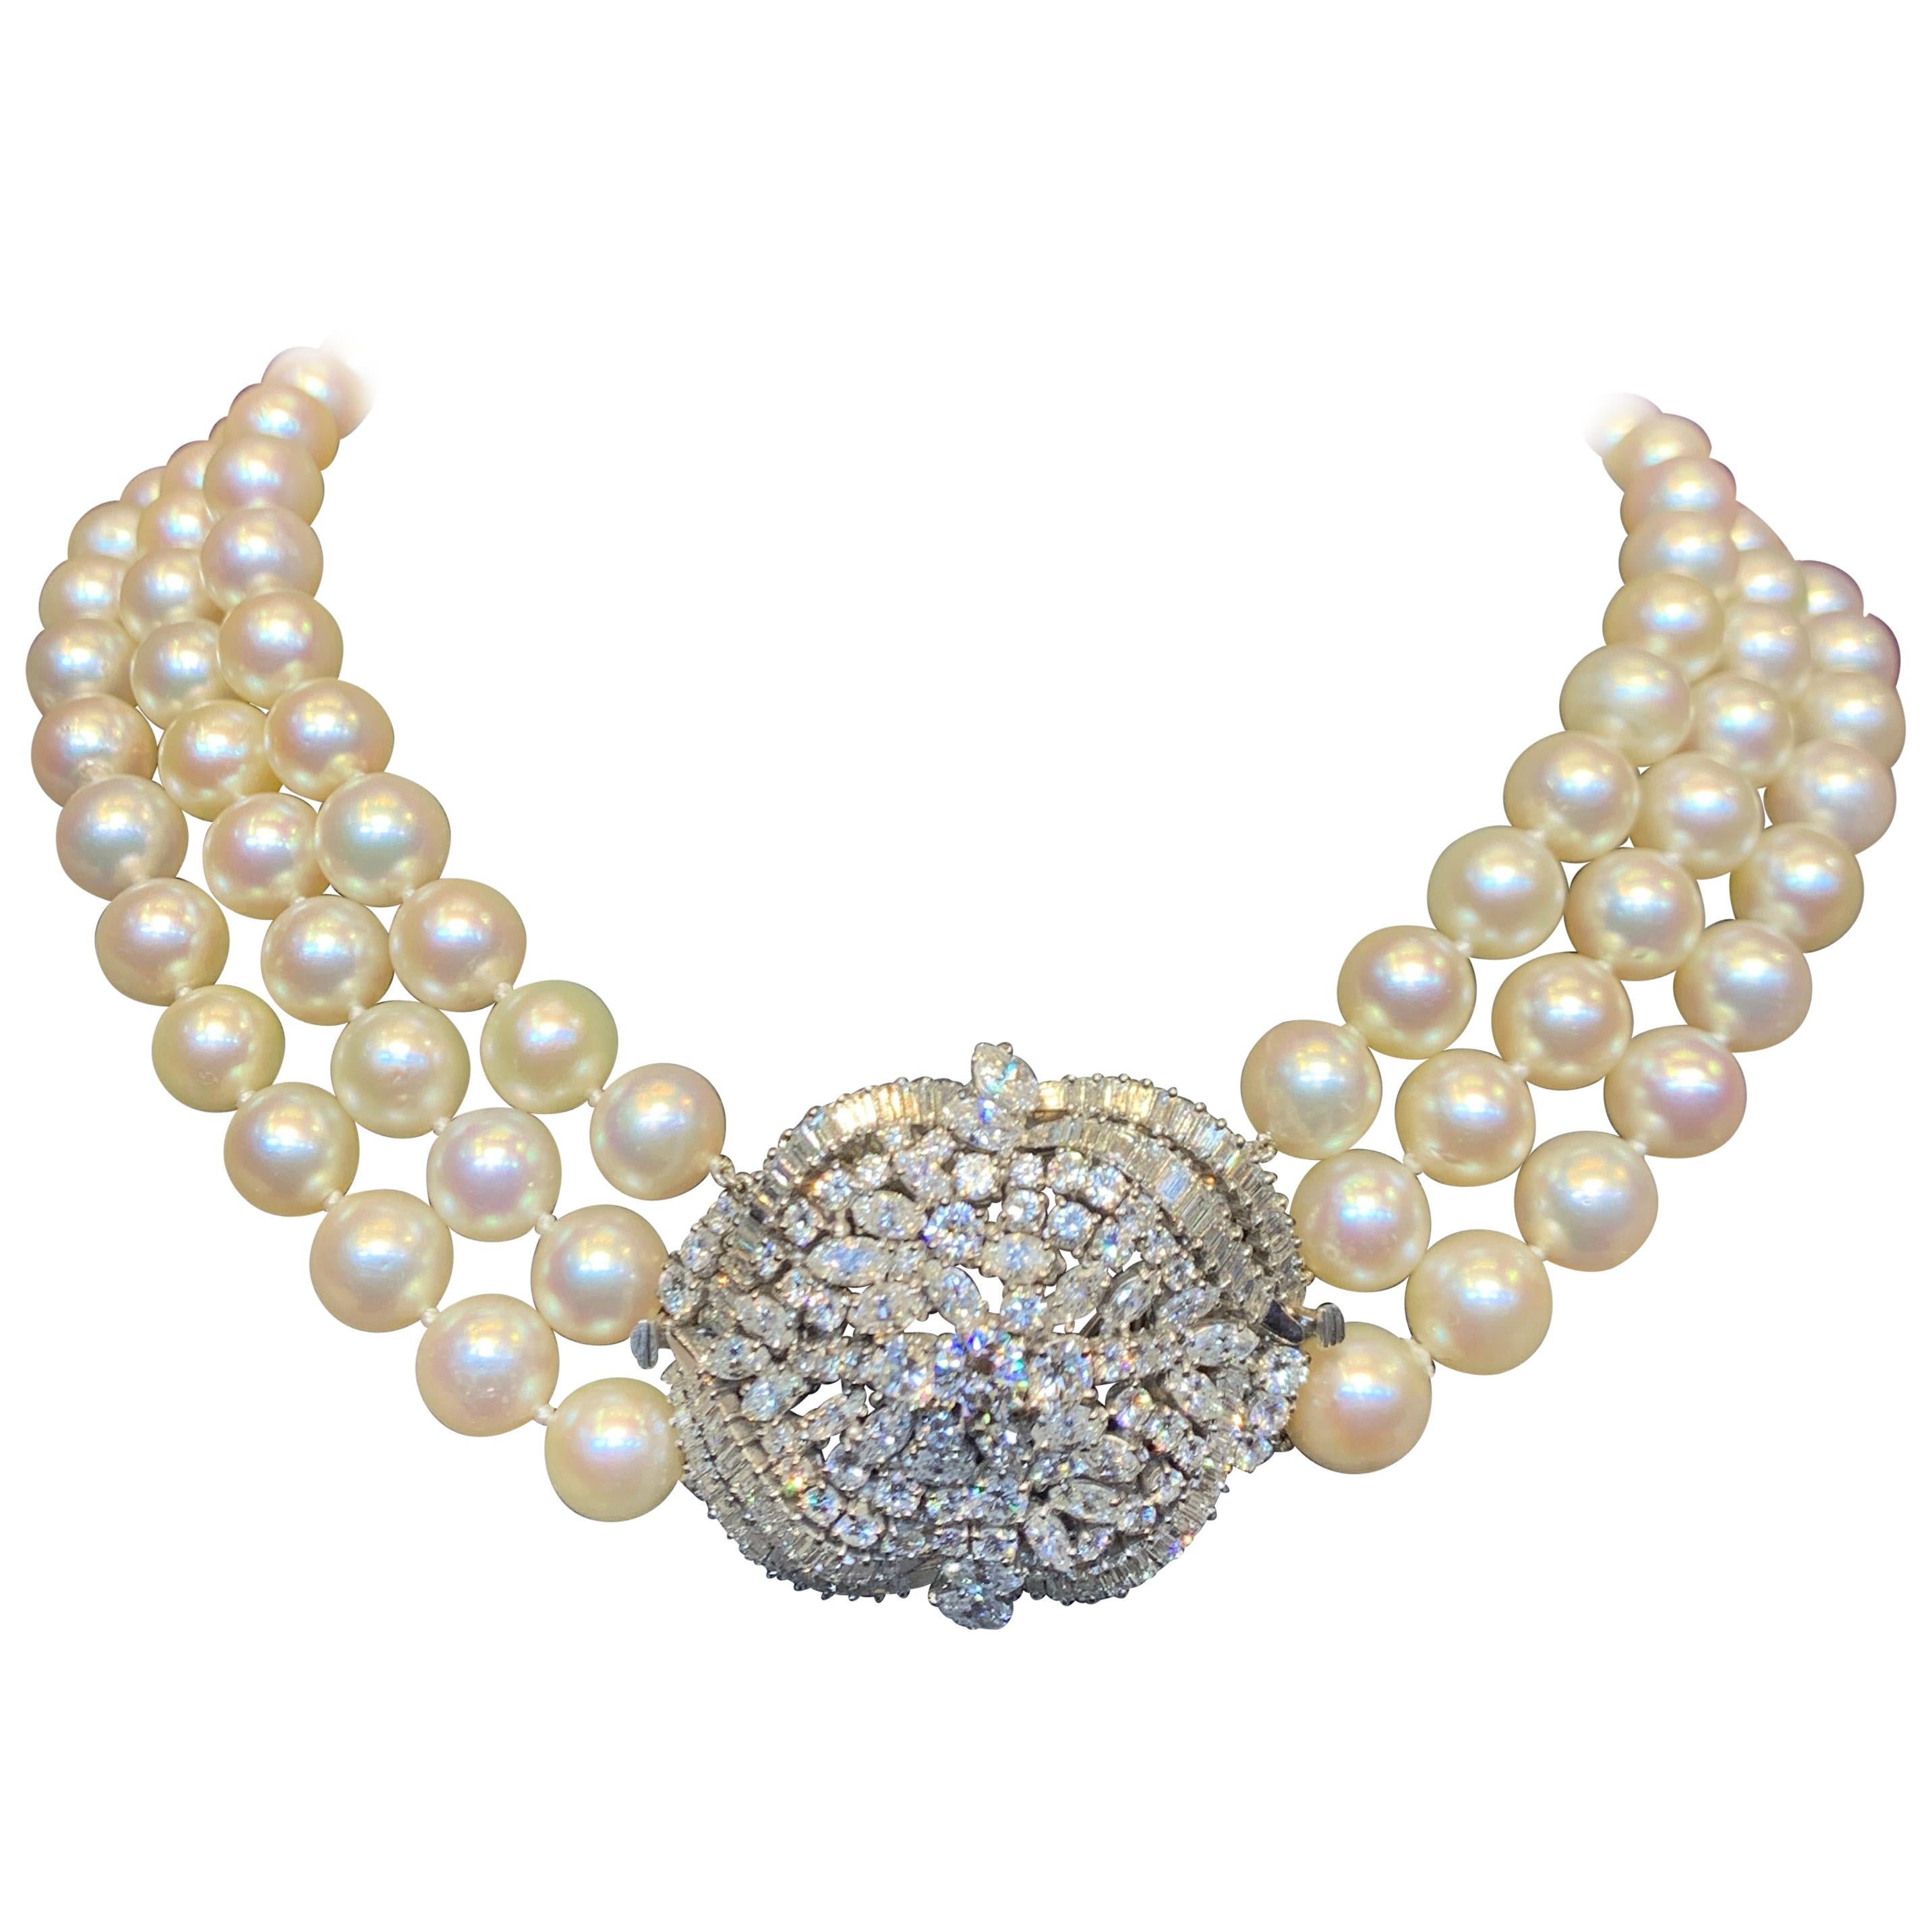 Three Strand Pearl  & Diamond Necklace
162 Diamonds total approximate 10 carats
Center diamond element is convertible to a diamond brooch. 
Measurements: 16.5